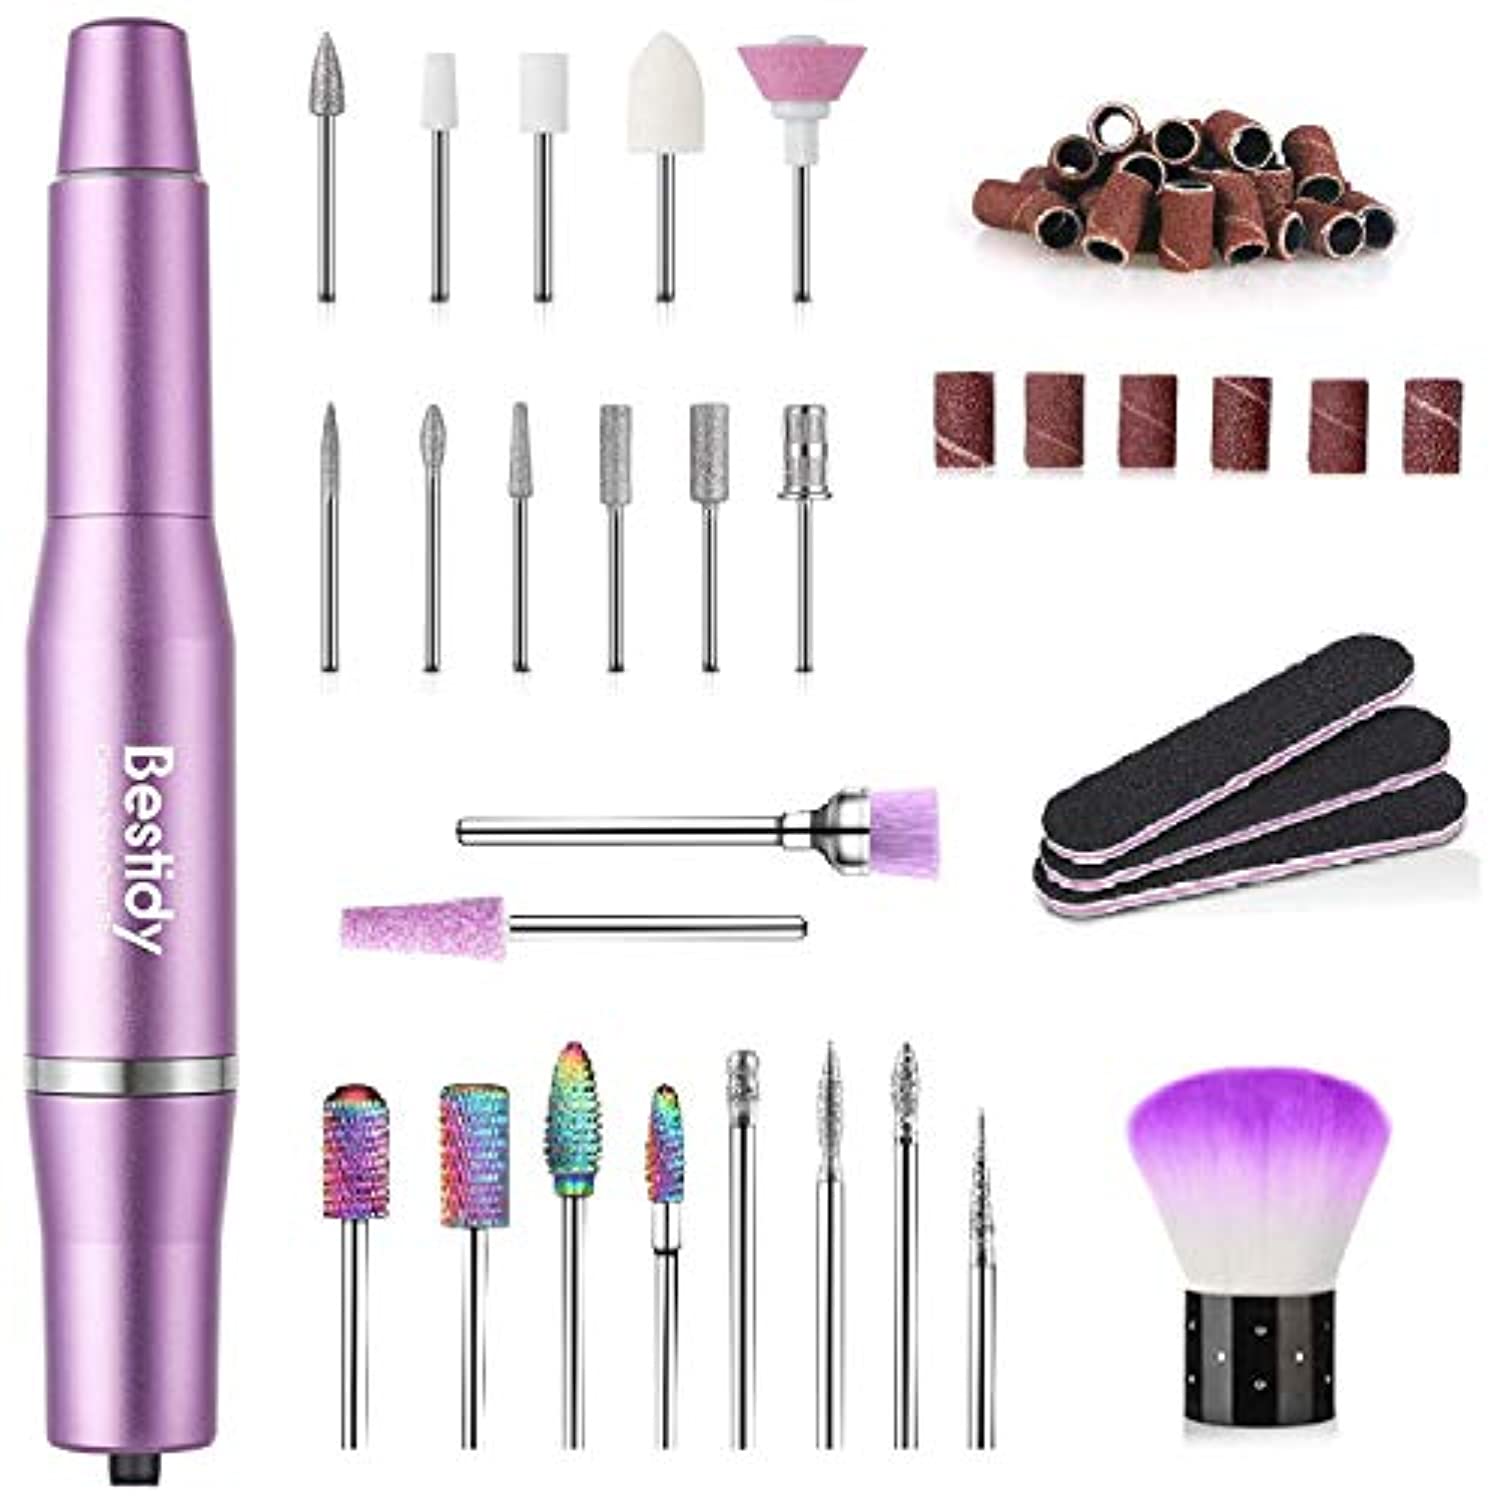 Bestidy Electric Nail Drill Kit,2020 Upgraded Professional Nail File Portable Manicure Pedicure Drill Kit for Acrylic Nails with Manicure Pedicure Brush,Sanding Band,10pcs Tungsten Carbide Bits